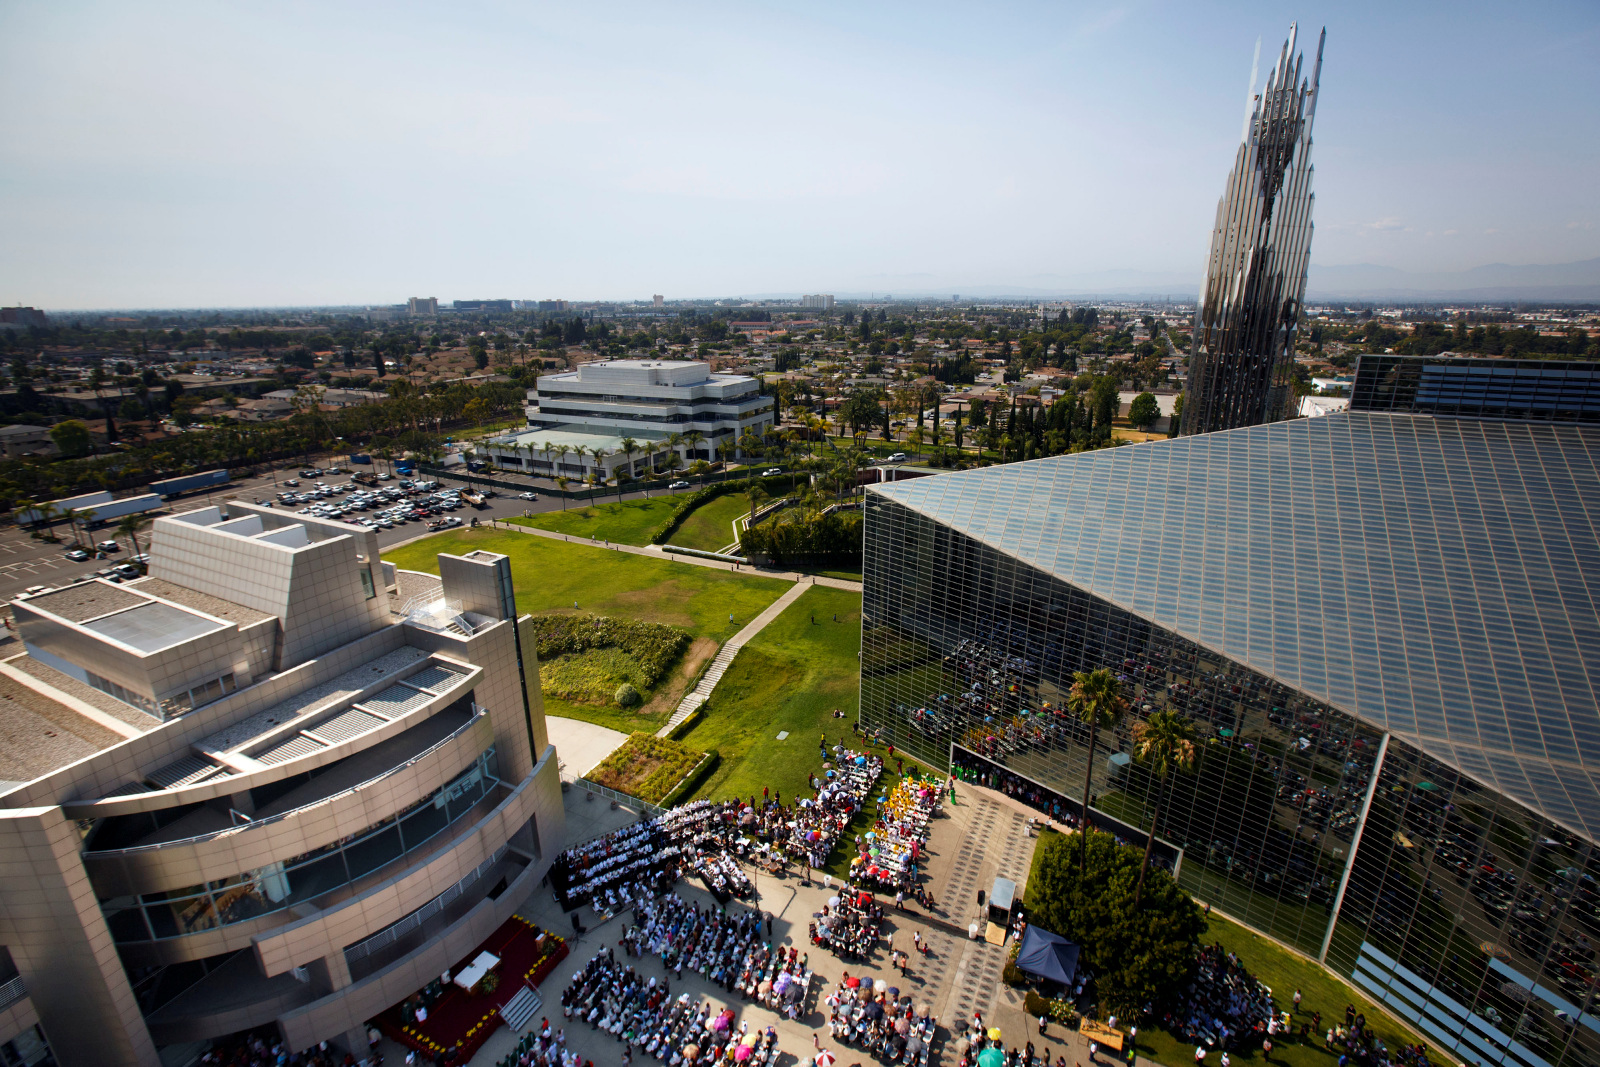 The Roman Catholic Diocese of Orange in Garden Grove, Calif. unveiled design plans for the Christ Cathedral, which will address the complex needs of the 1.3 million member diocese. Photo courtesy of Roman Catholic Diocese of Orange